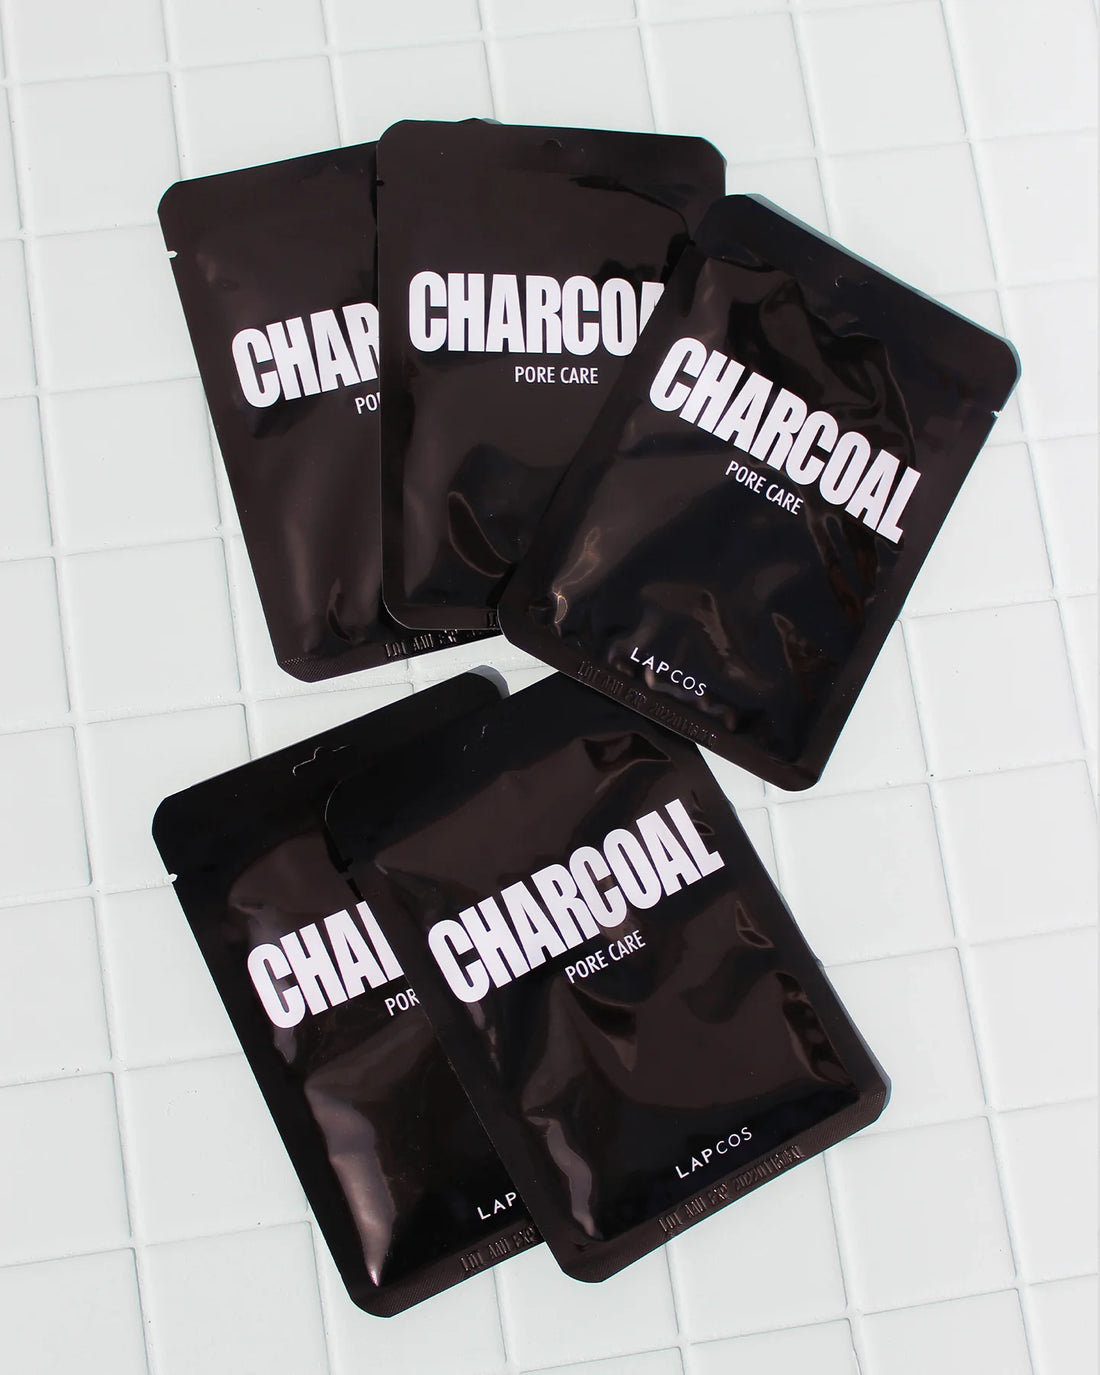 the 5-pack lapcos charcoal sheet mask sold at heven on earth